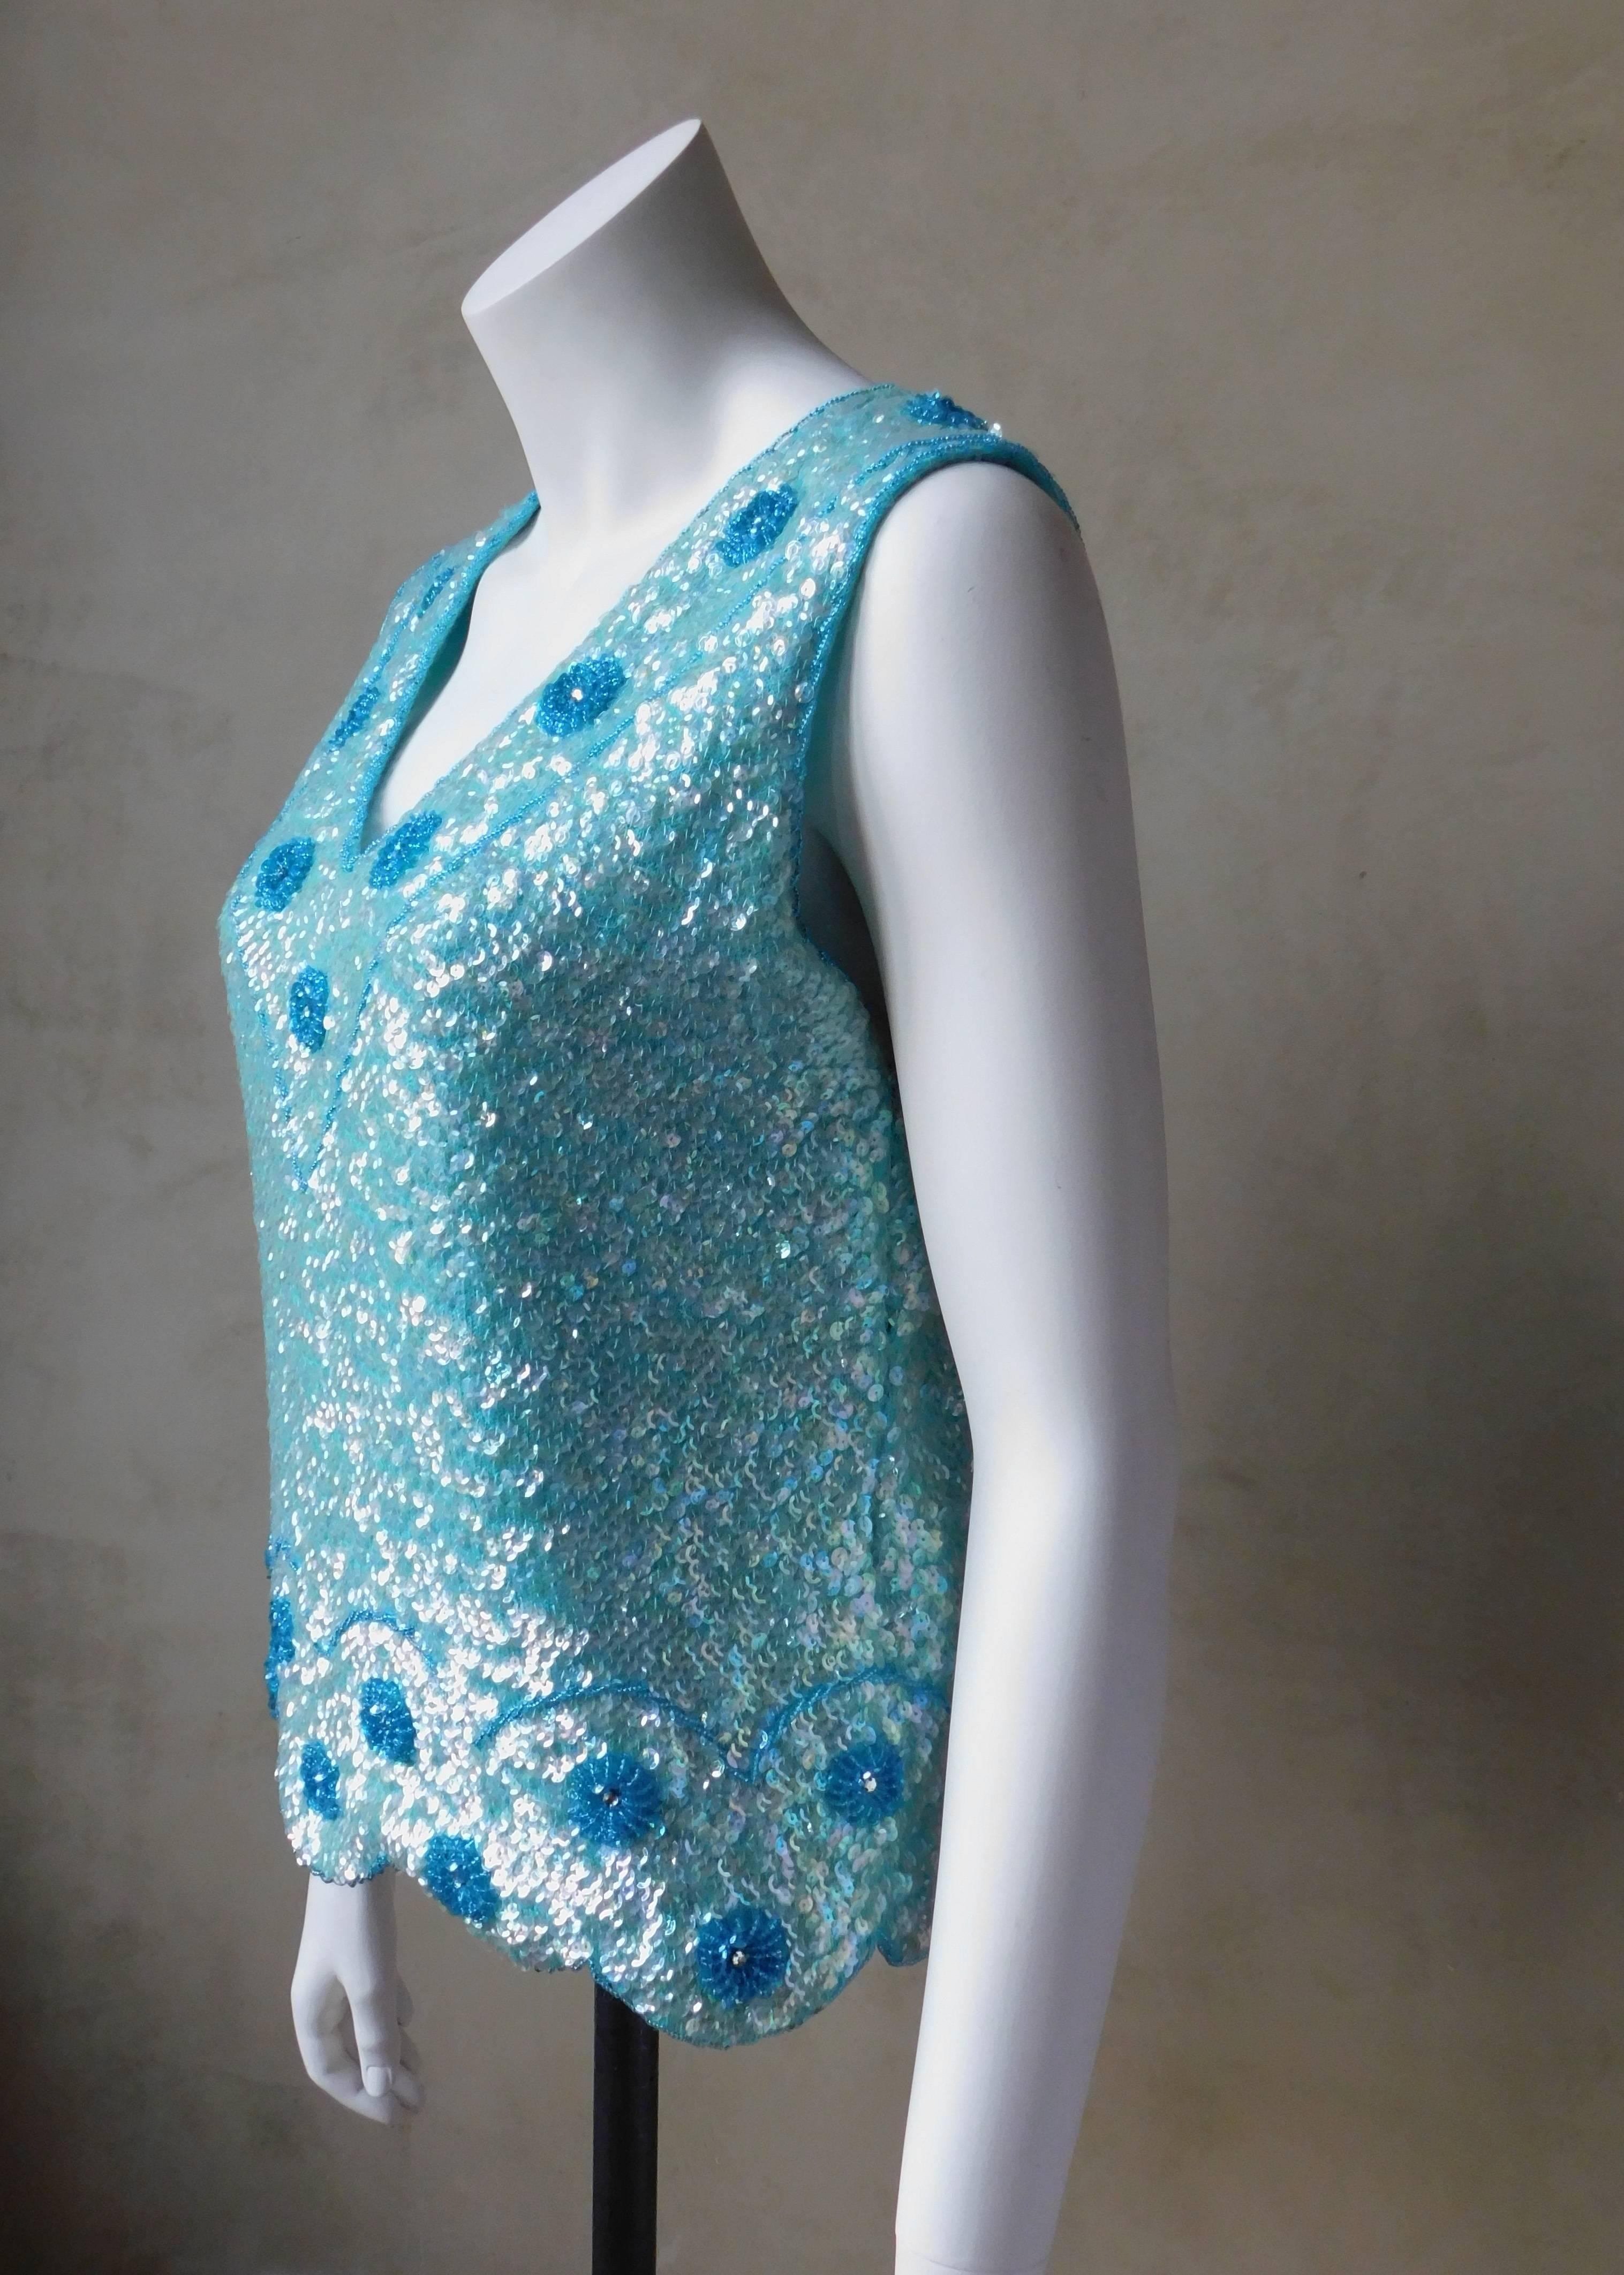 This vintage  1960's cashmere sweater is fully encrusted with opaline sequins giving the surface a mermaid affect. The neckline and scalloped bottom edge have hand beaded flowers. Absolutely rare to find a sweater of this vintage in such good